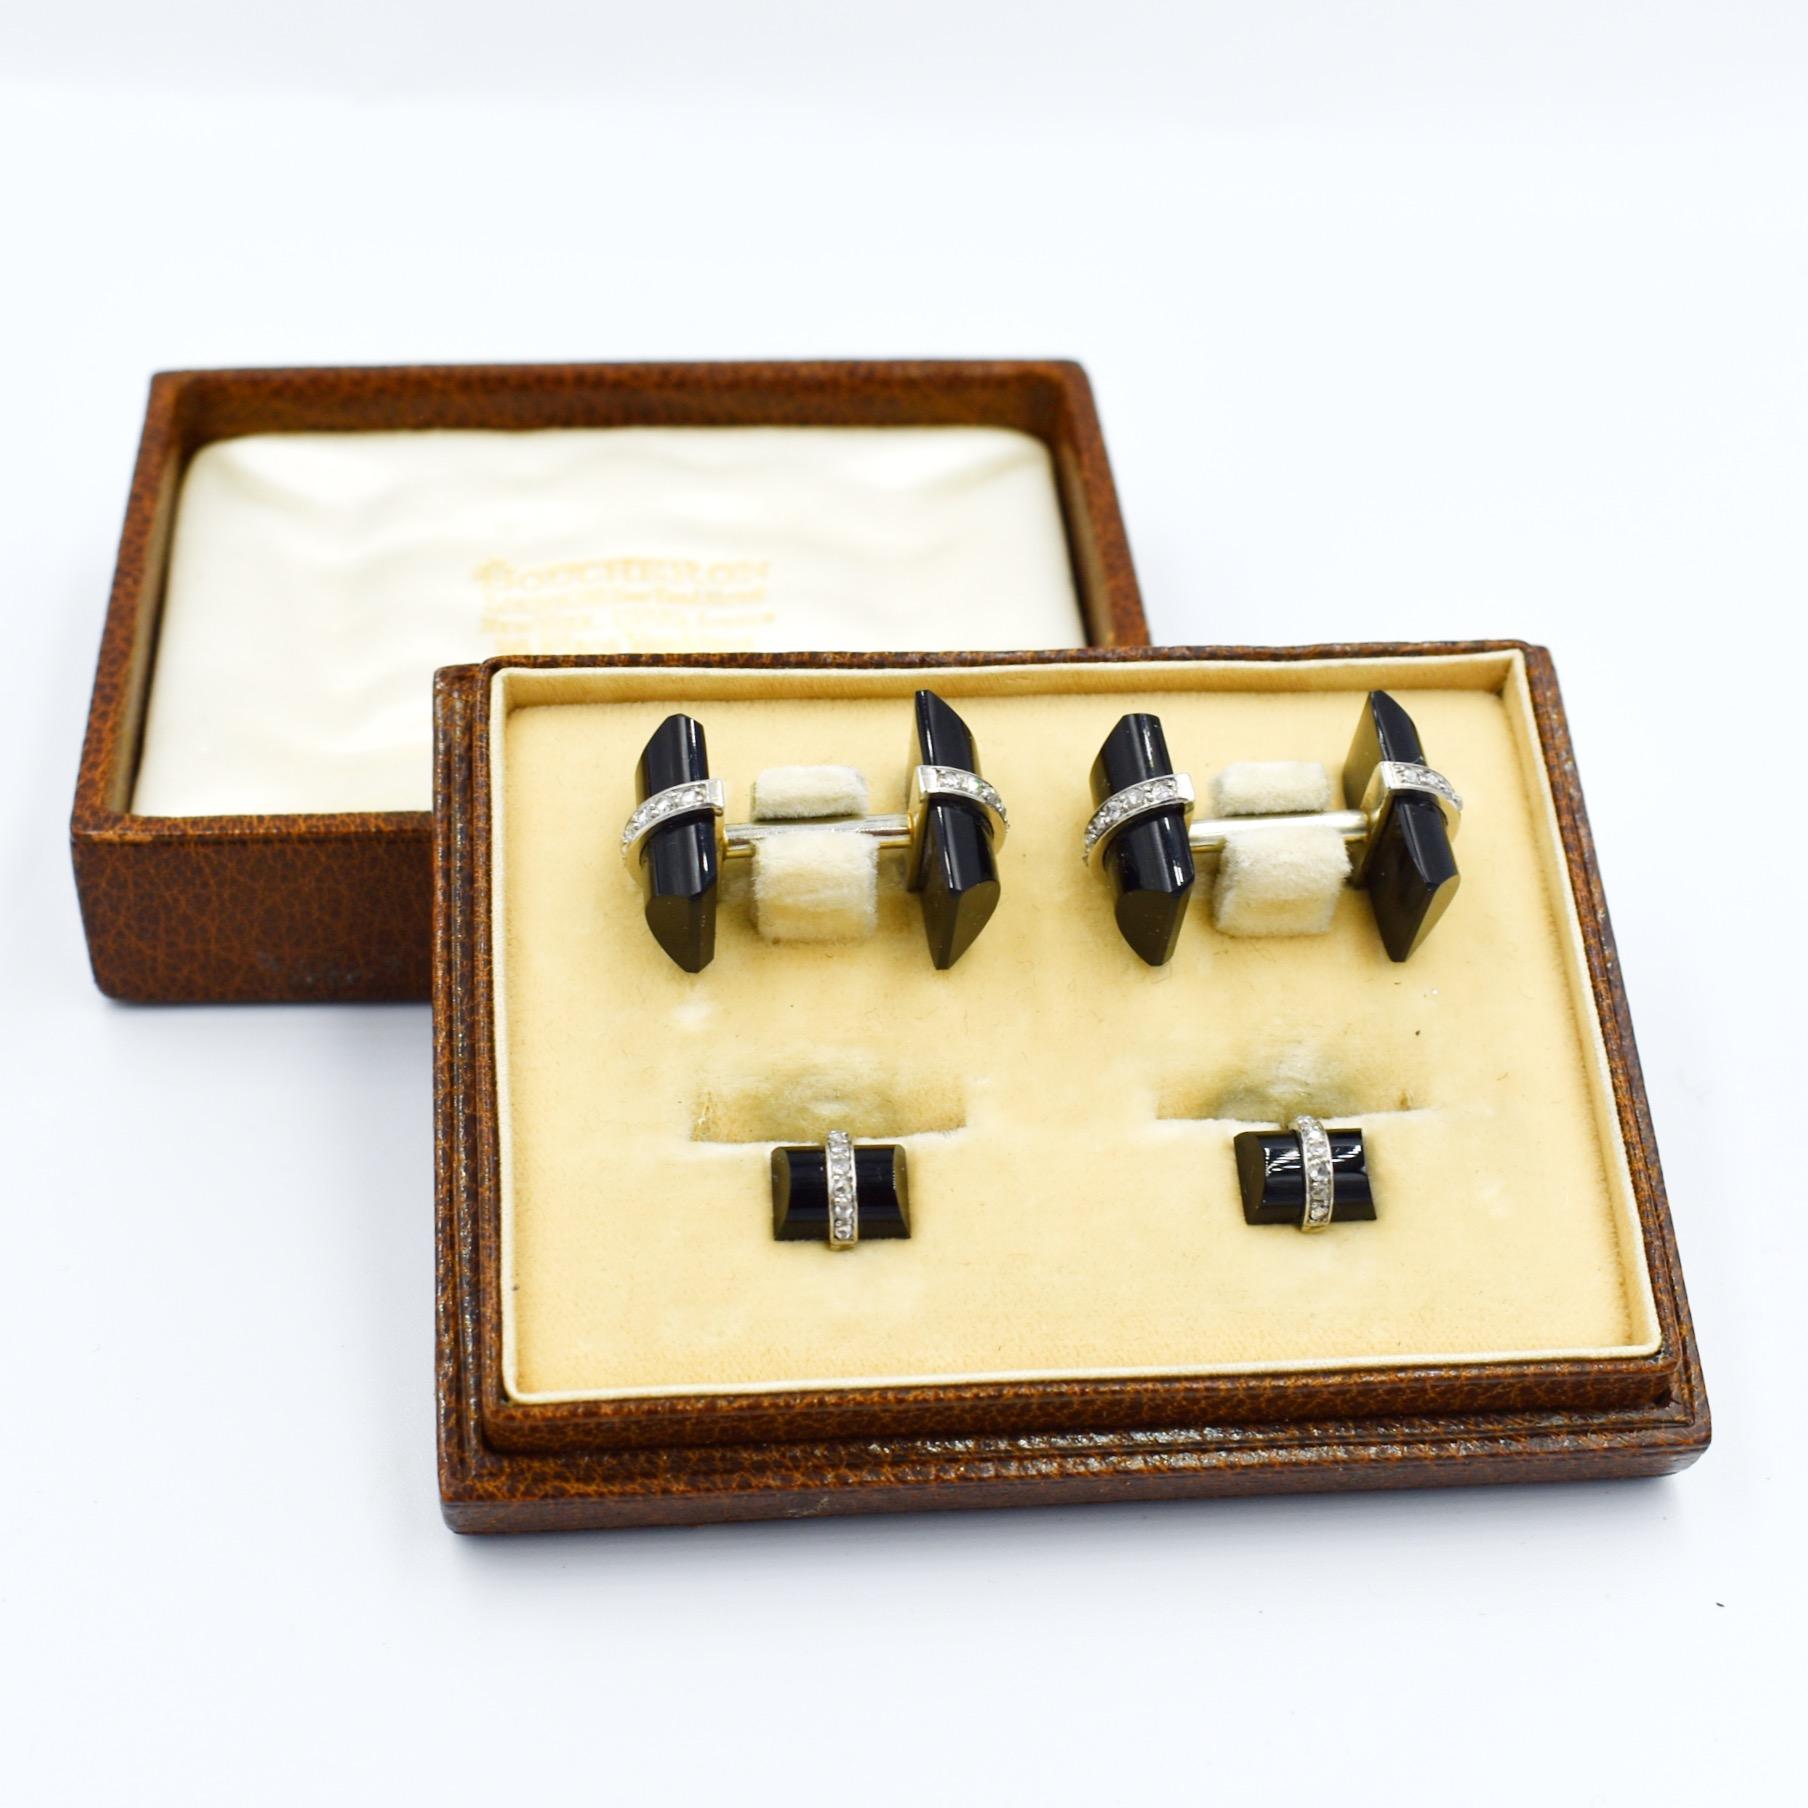 
Complete set of cufflinks and collar from the Boucheron Paris house, in their original leather case, dating back to the Art Deco era (circa 1920).

The buttons are made of 18-carat white gold and platinum, adorned with diamonds. The sticks are made